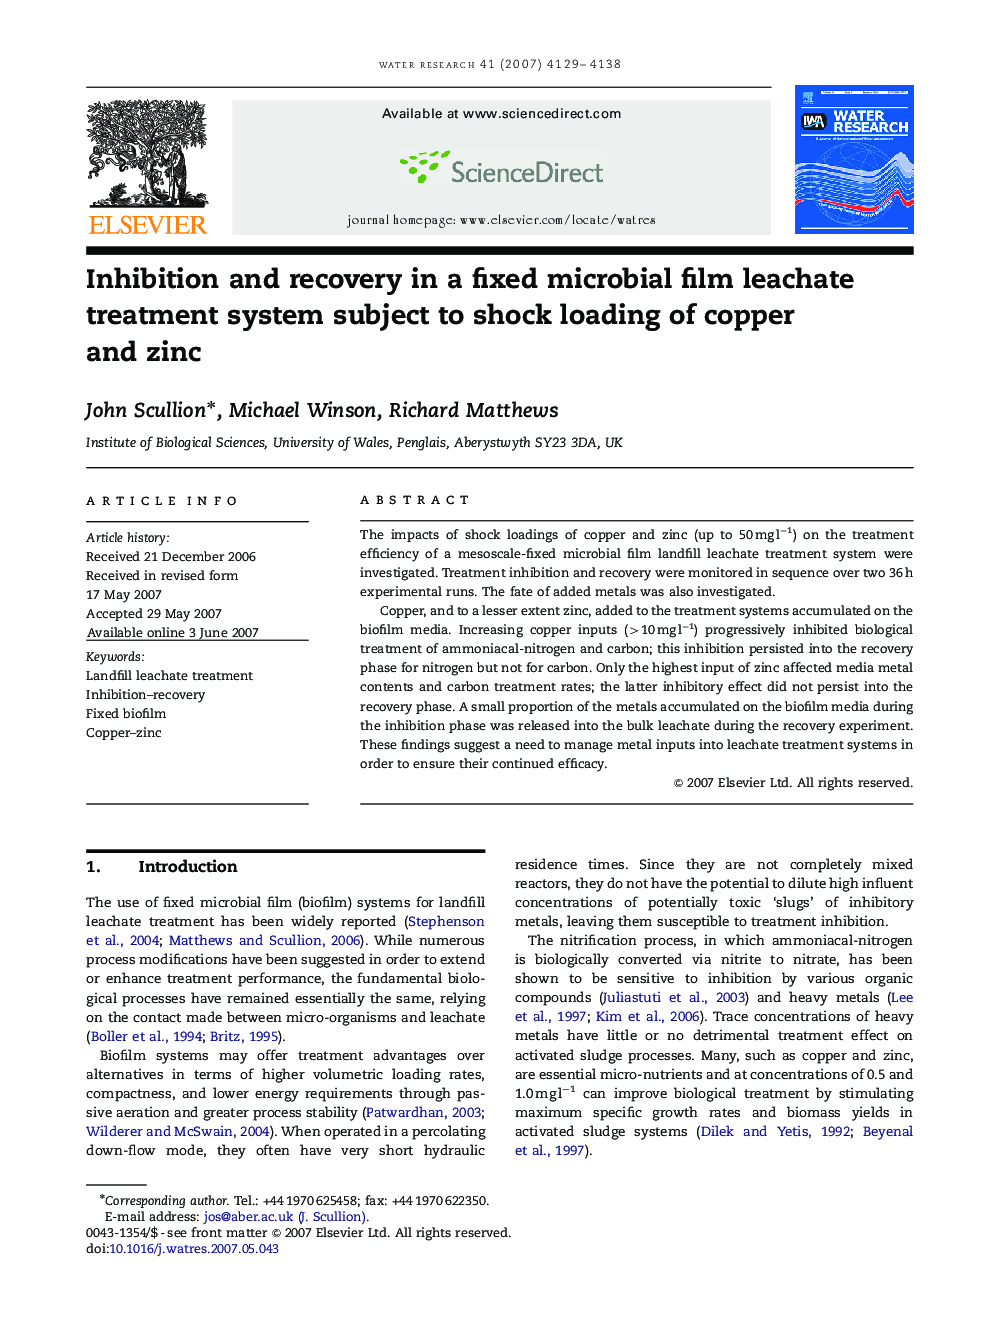 Inhibition and recovery in a fixed microbial film leachate treatment system subject to shock loading of copper and zinc